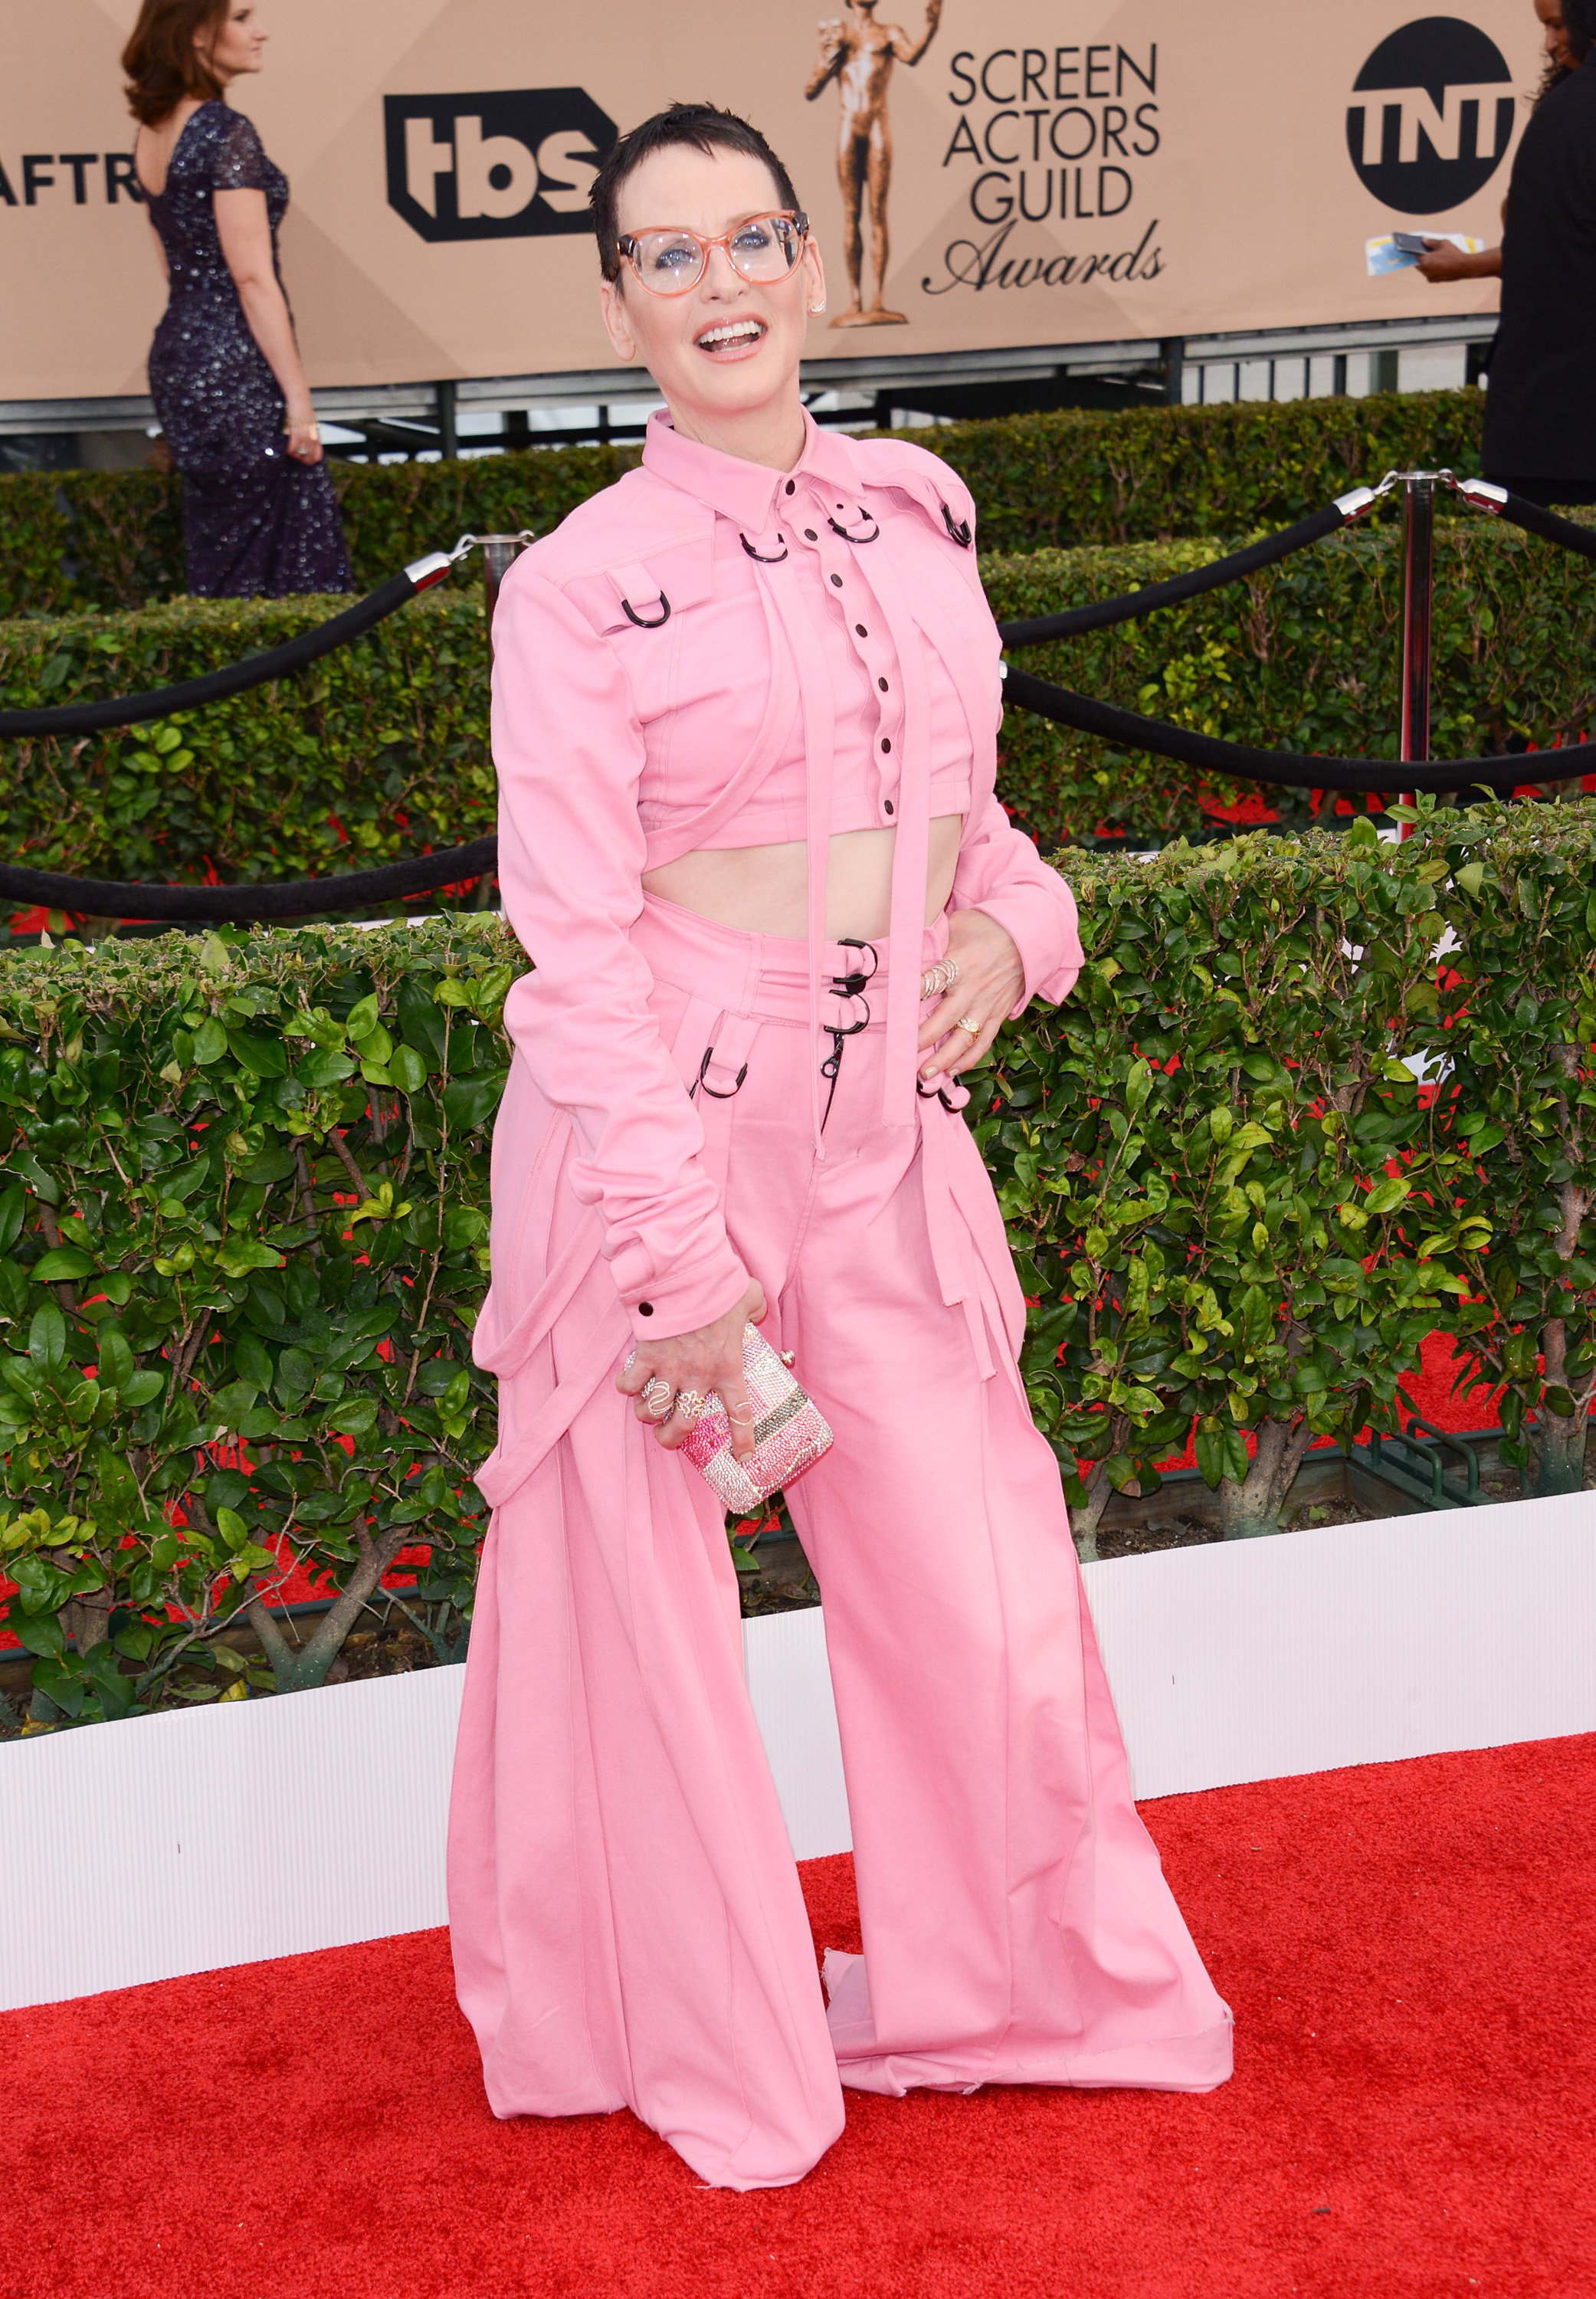 SAG Awards Fugs and Fabs: The Women of Orange Is The New Black